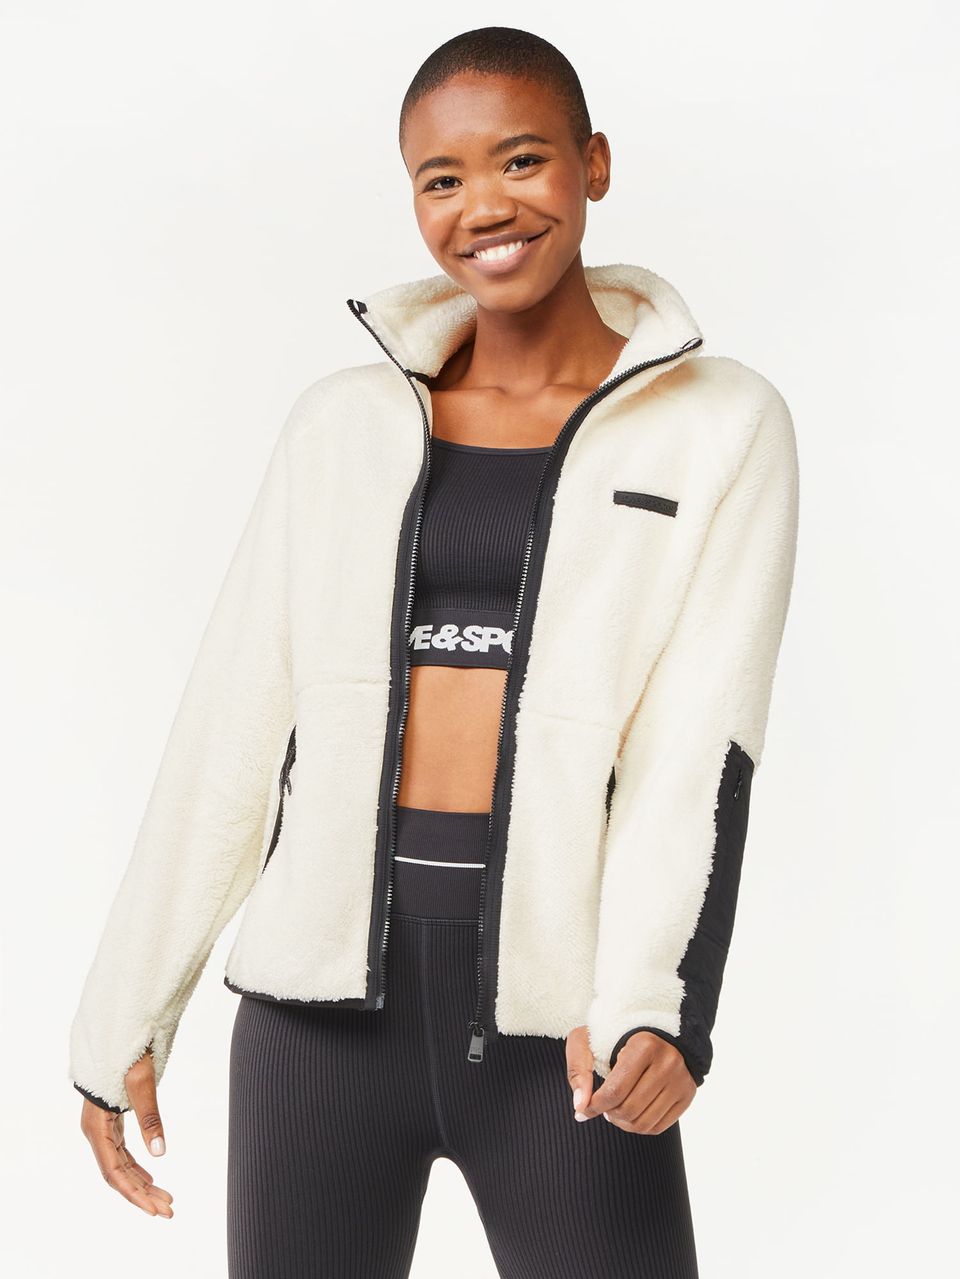 Women's Activewear From Walmart That's Affordable And Cool